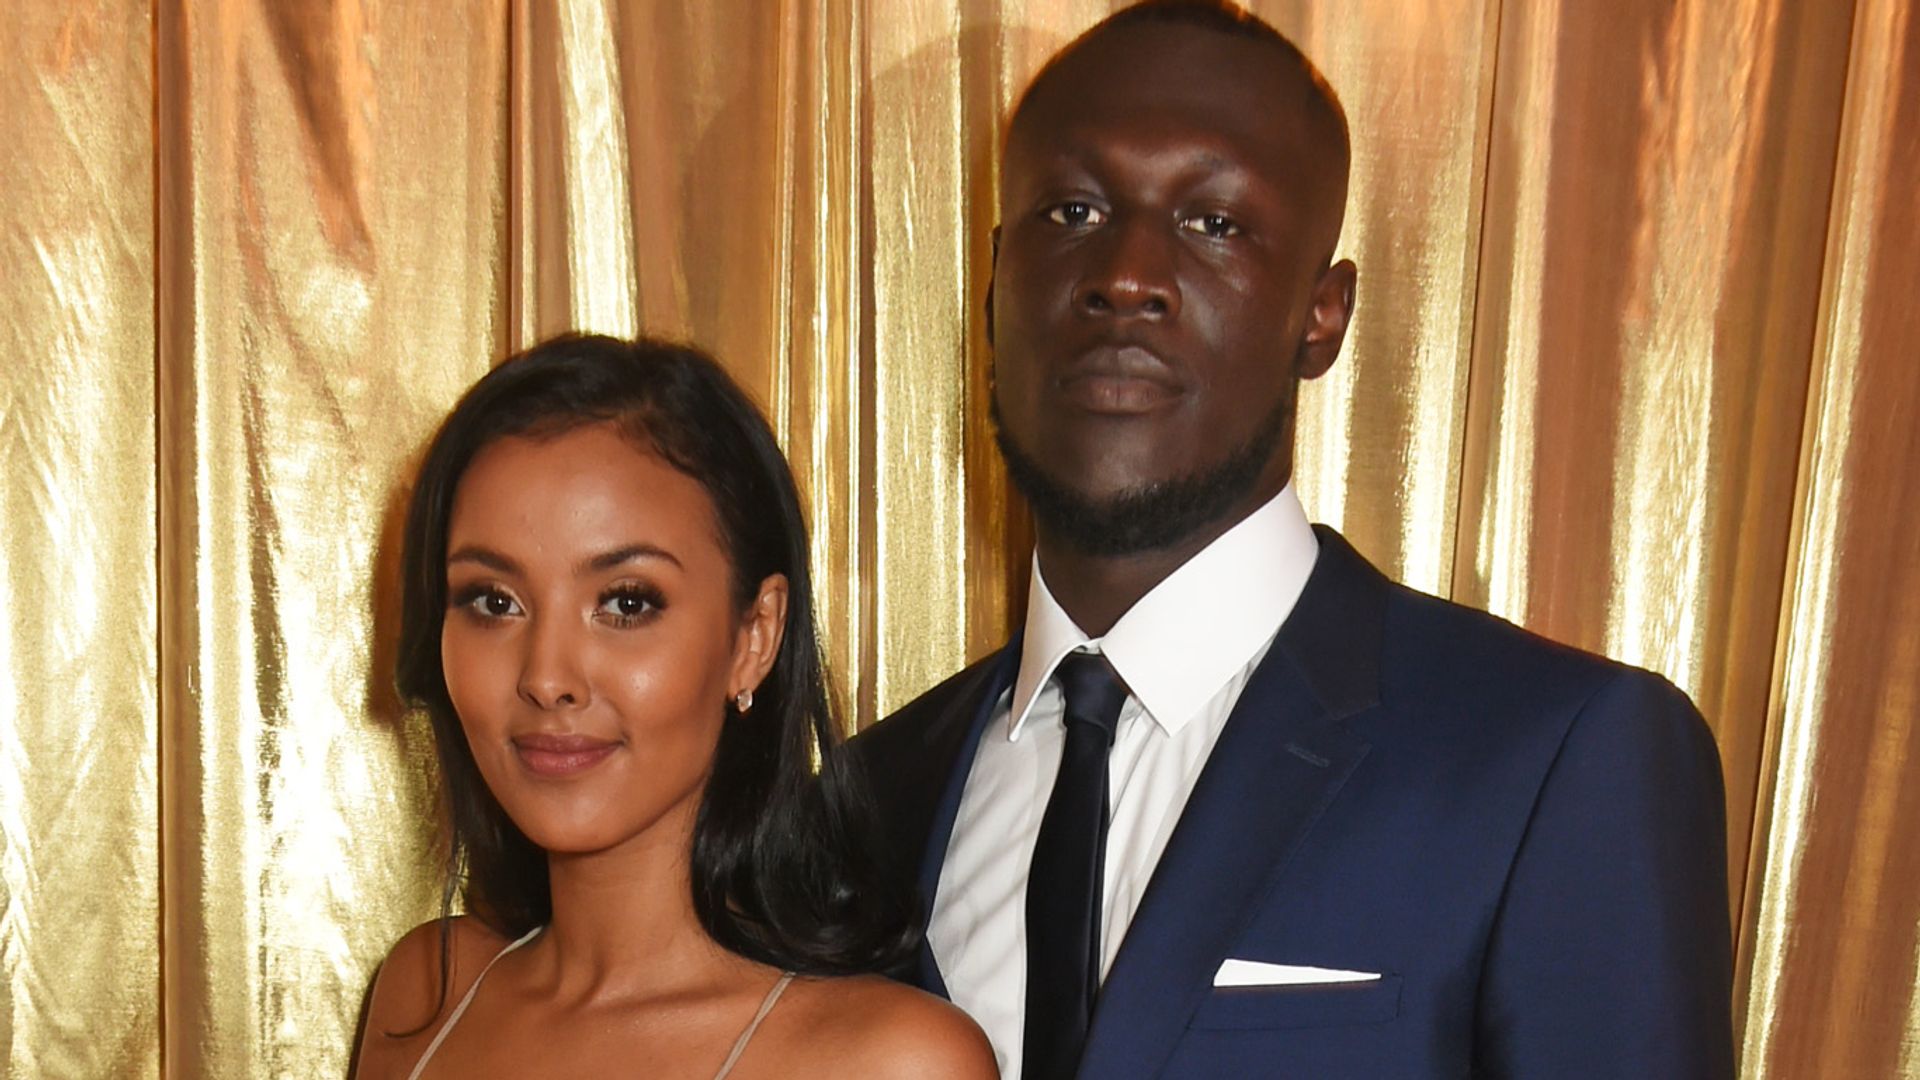 Maya Jama and Stormzy's relationship timeline – get all the details